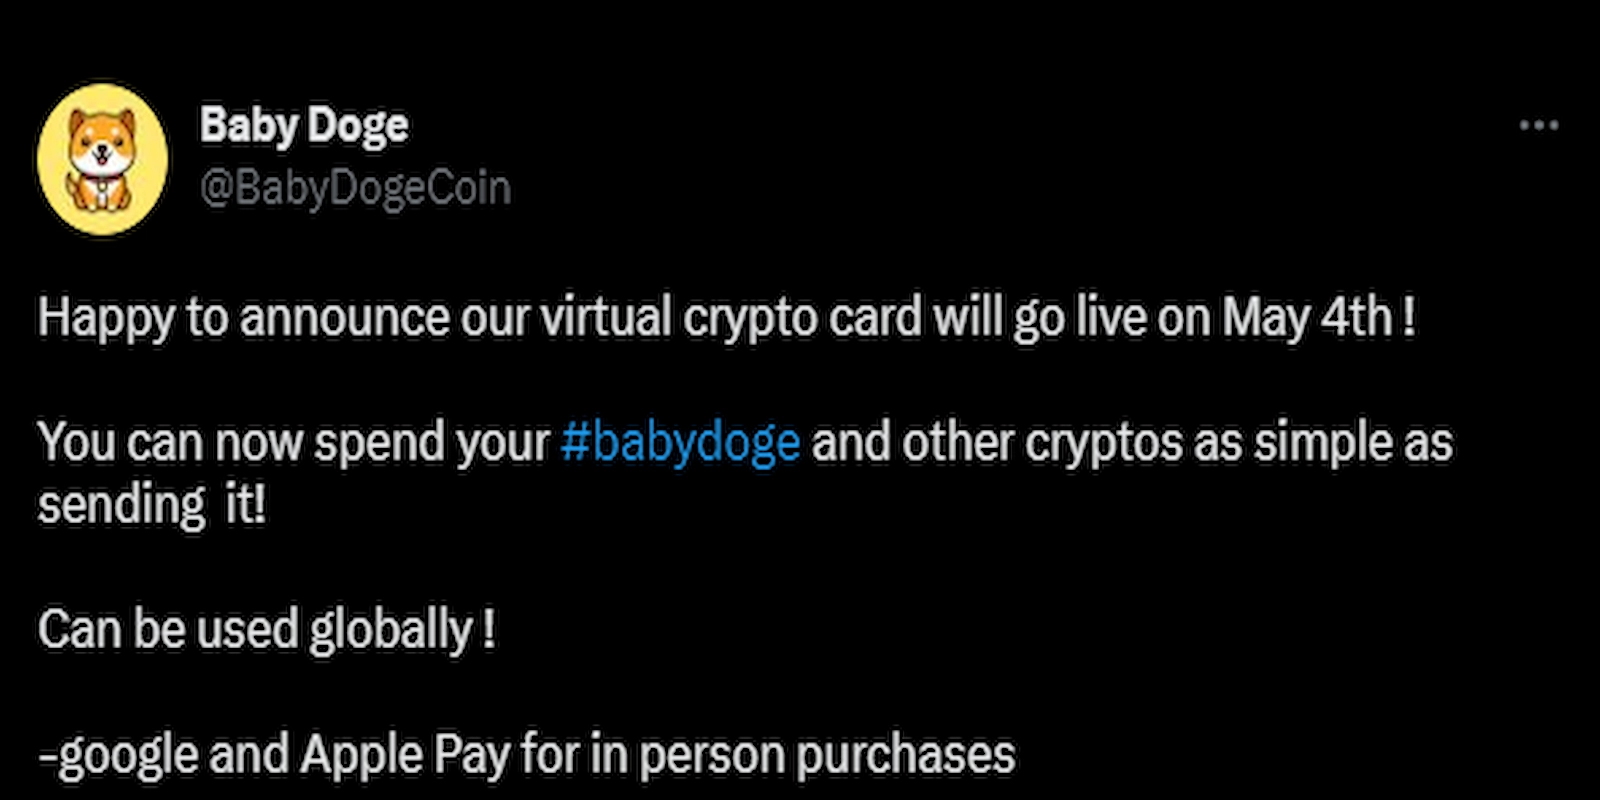 Baby Doge Coin team stated its virtual crypto card would launch on May 4.